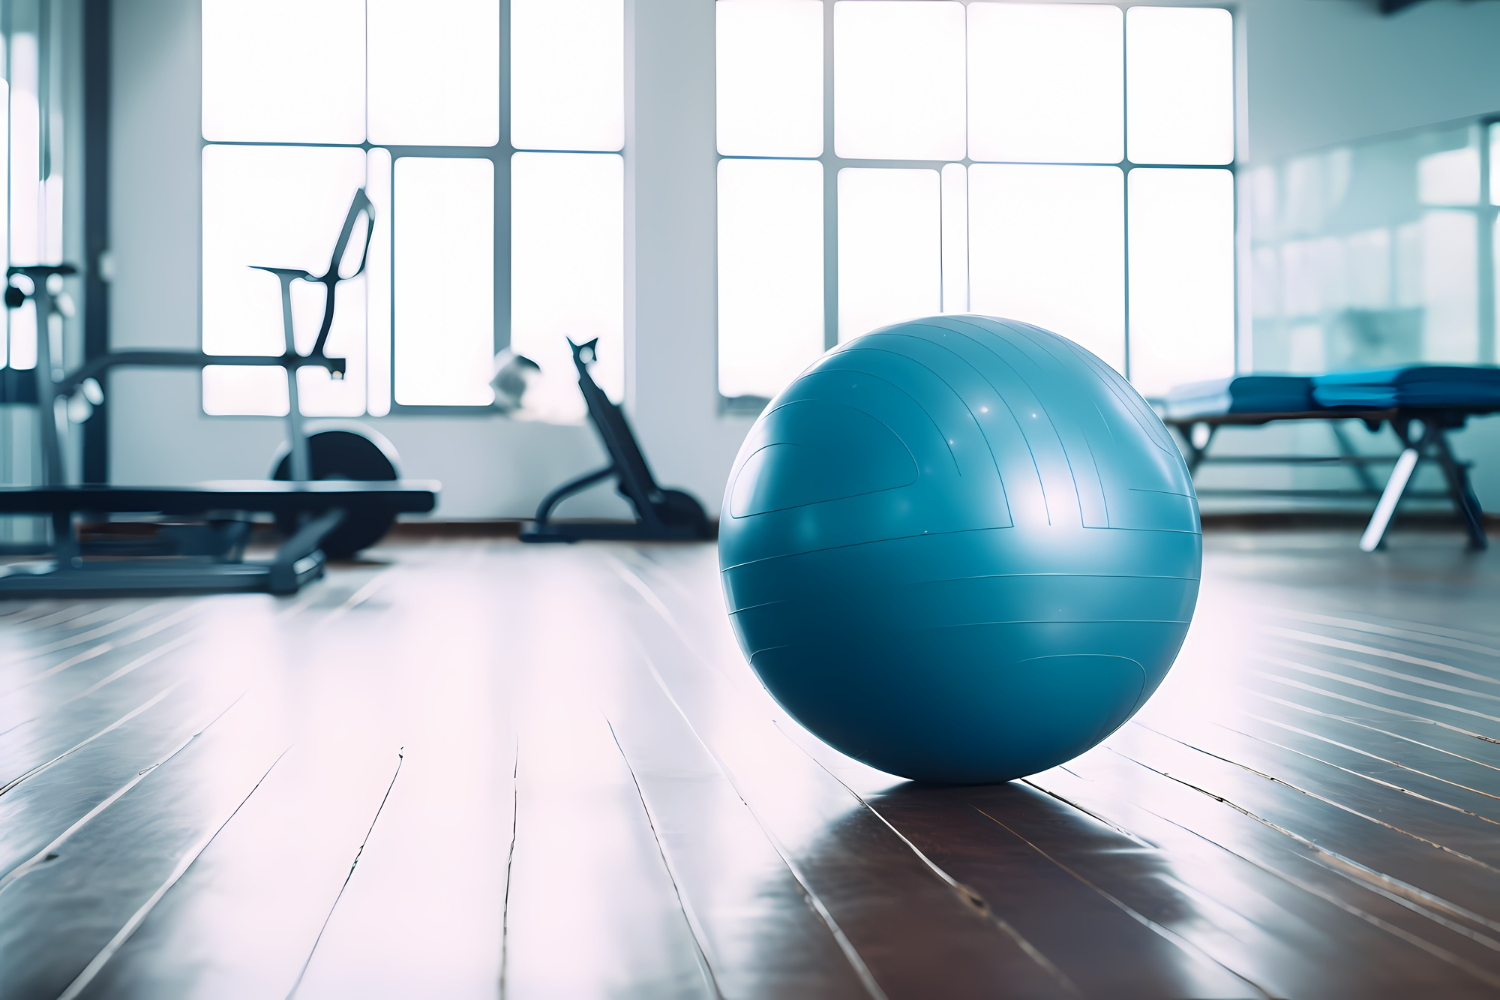 How to maximize your workout with Resistance Ball exercises